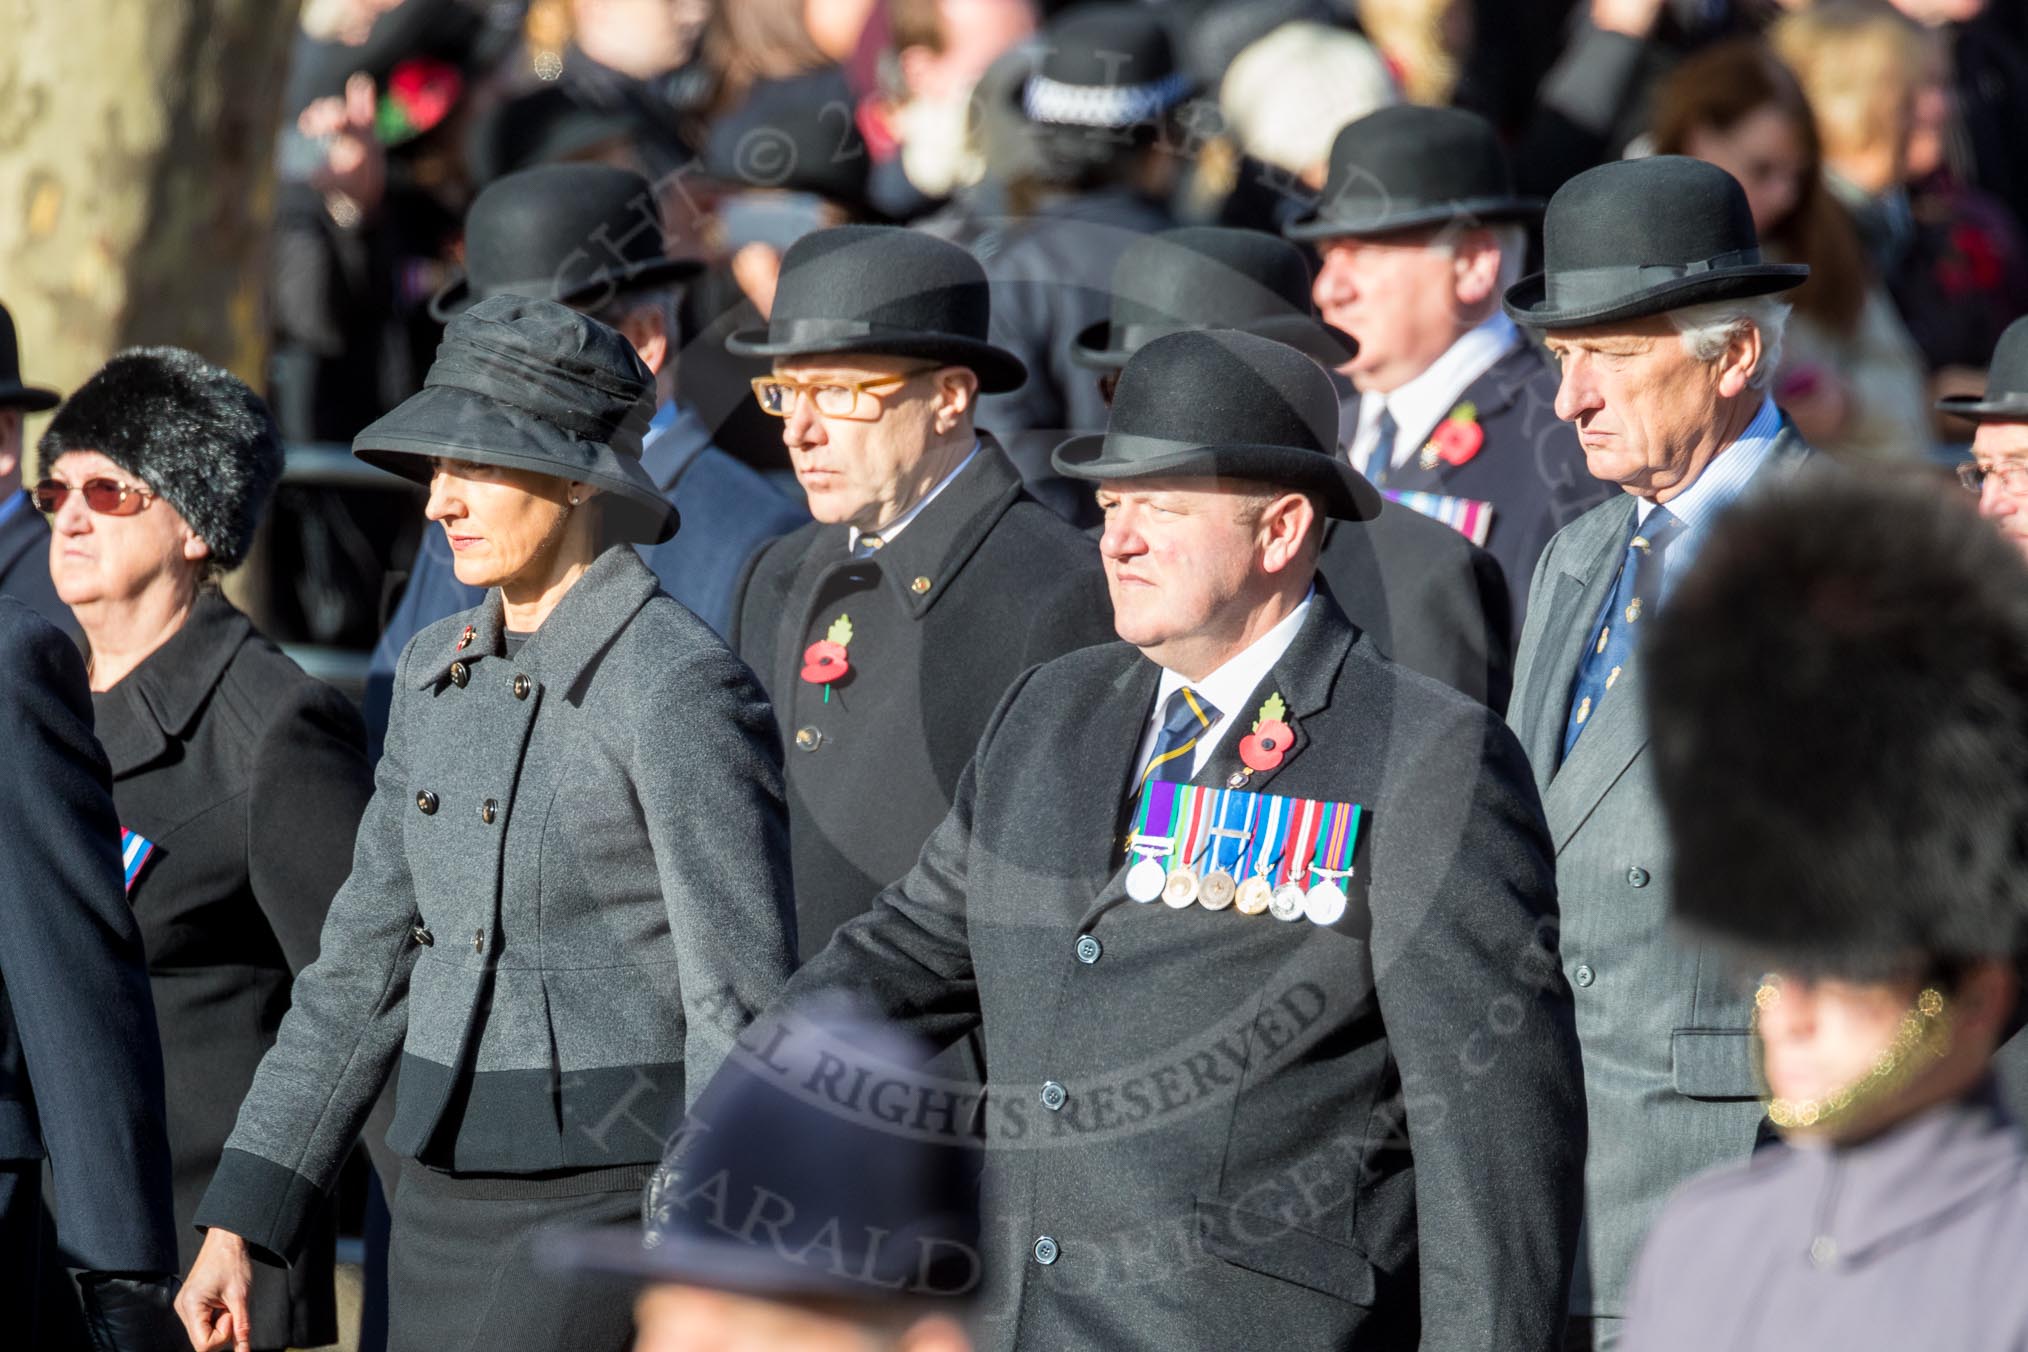 March Past, Remembrance Sunday at the Cenotaph 2016.
Cenotaph, Whitehall, London SW1,
London,
Greater London,
United Kingdom,
on 13 November 2016 at 12:37, image #359